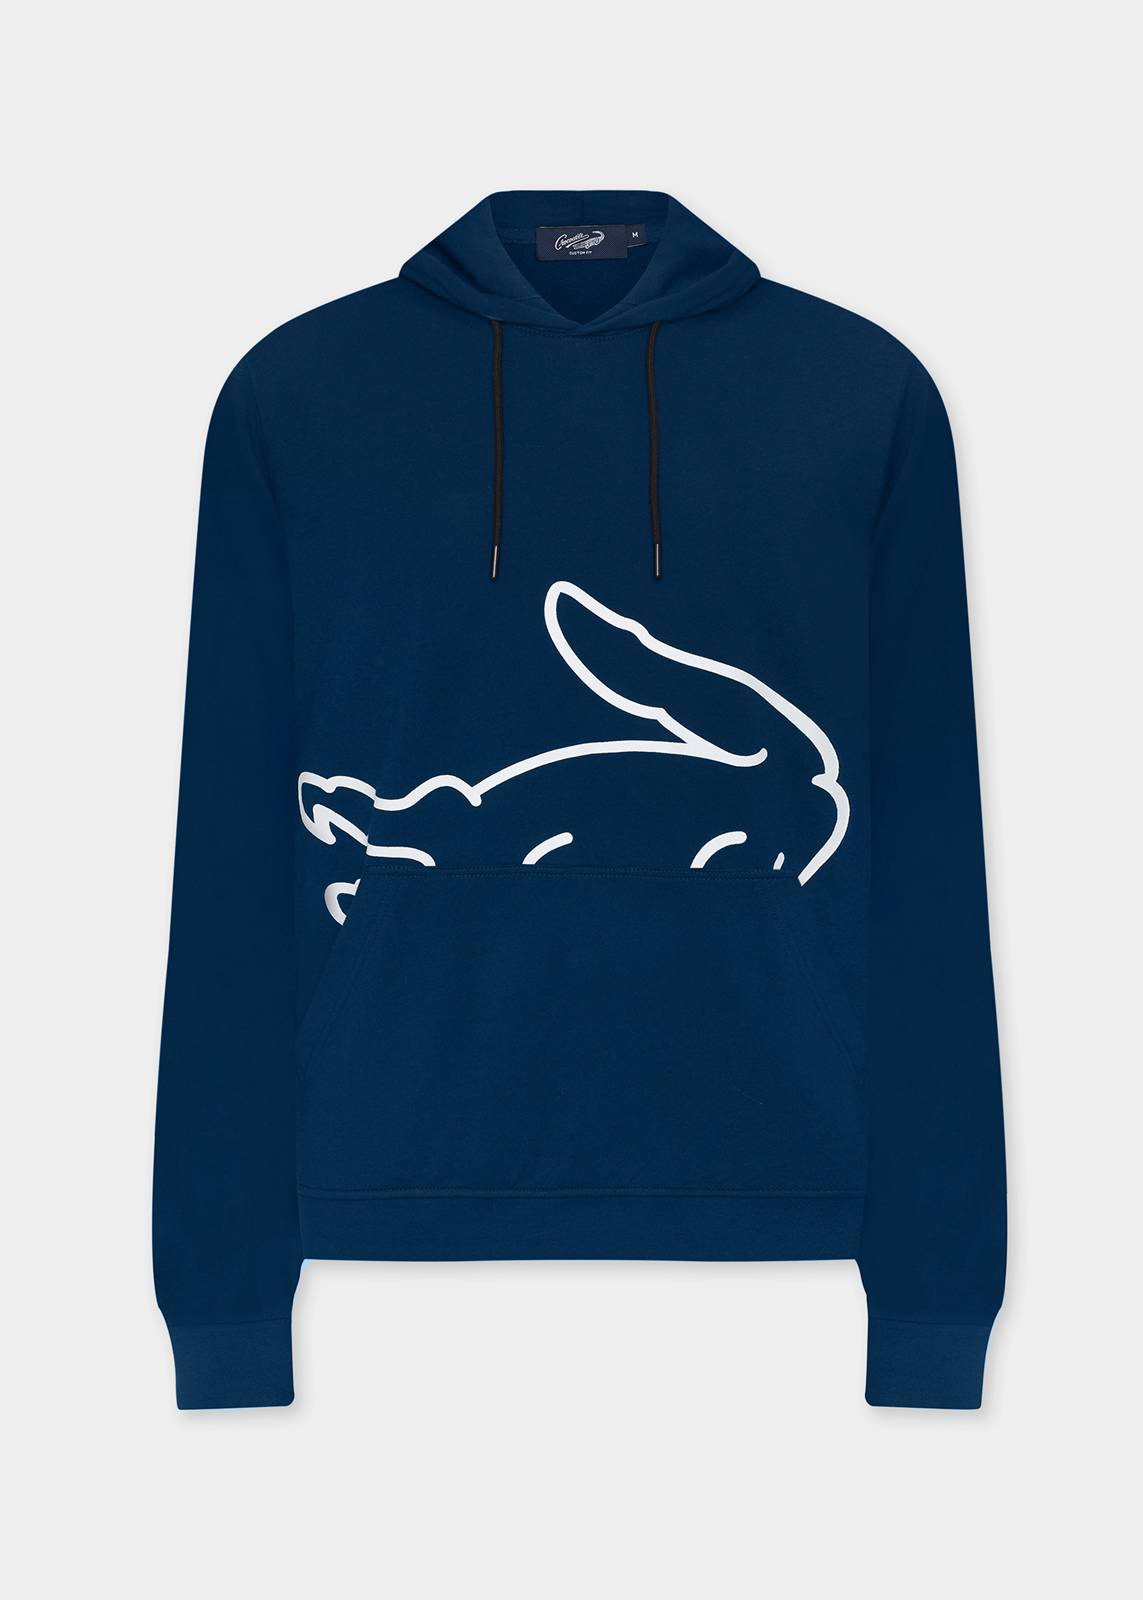 NAVY HOODIE CUSTOM FIT WITH GRAPHIC PRINT